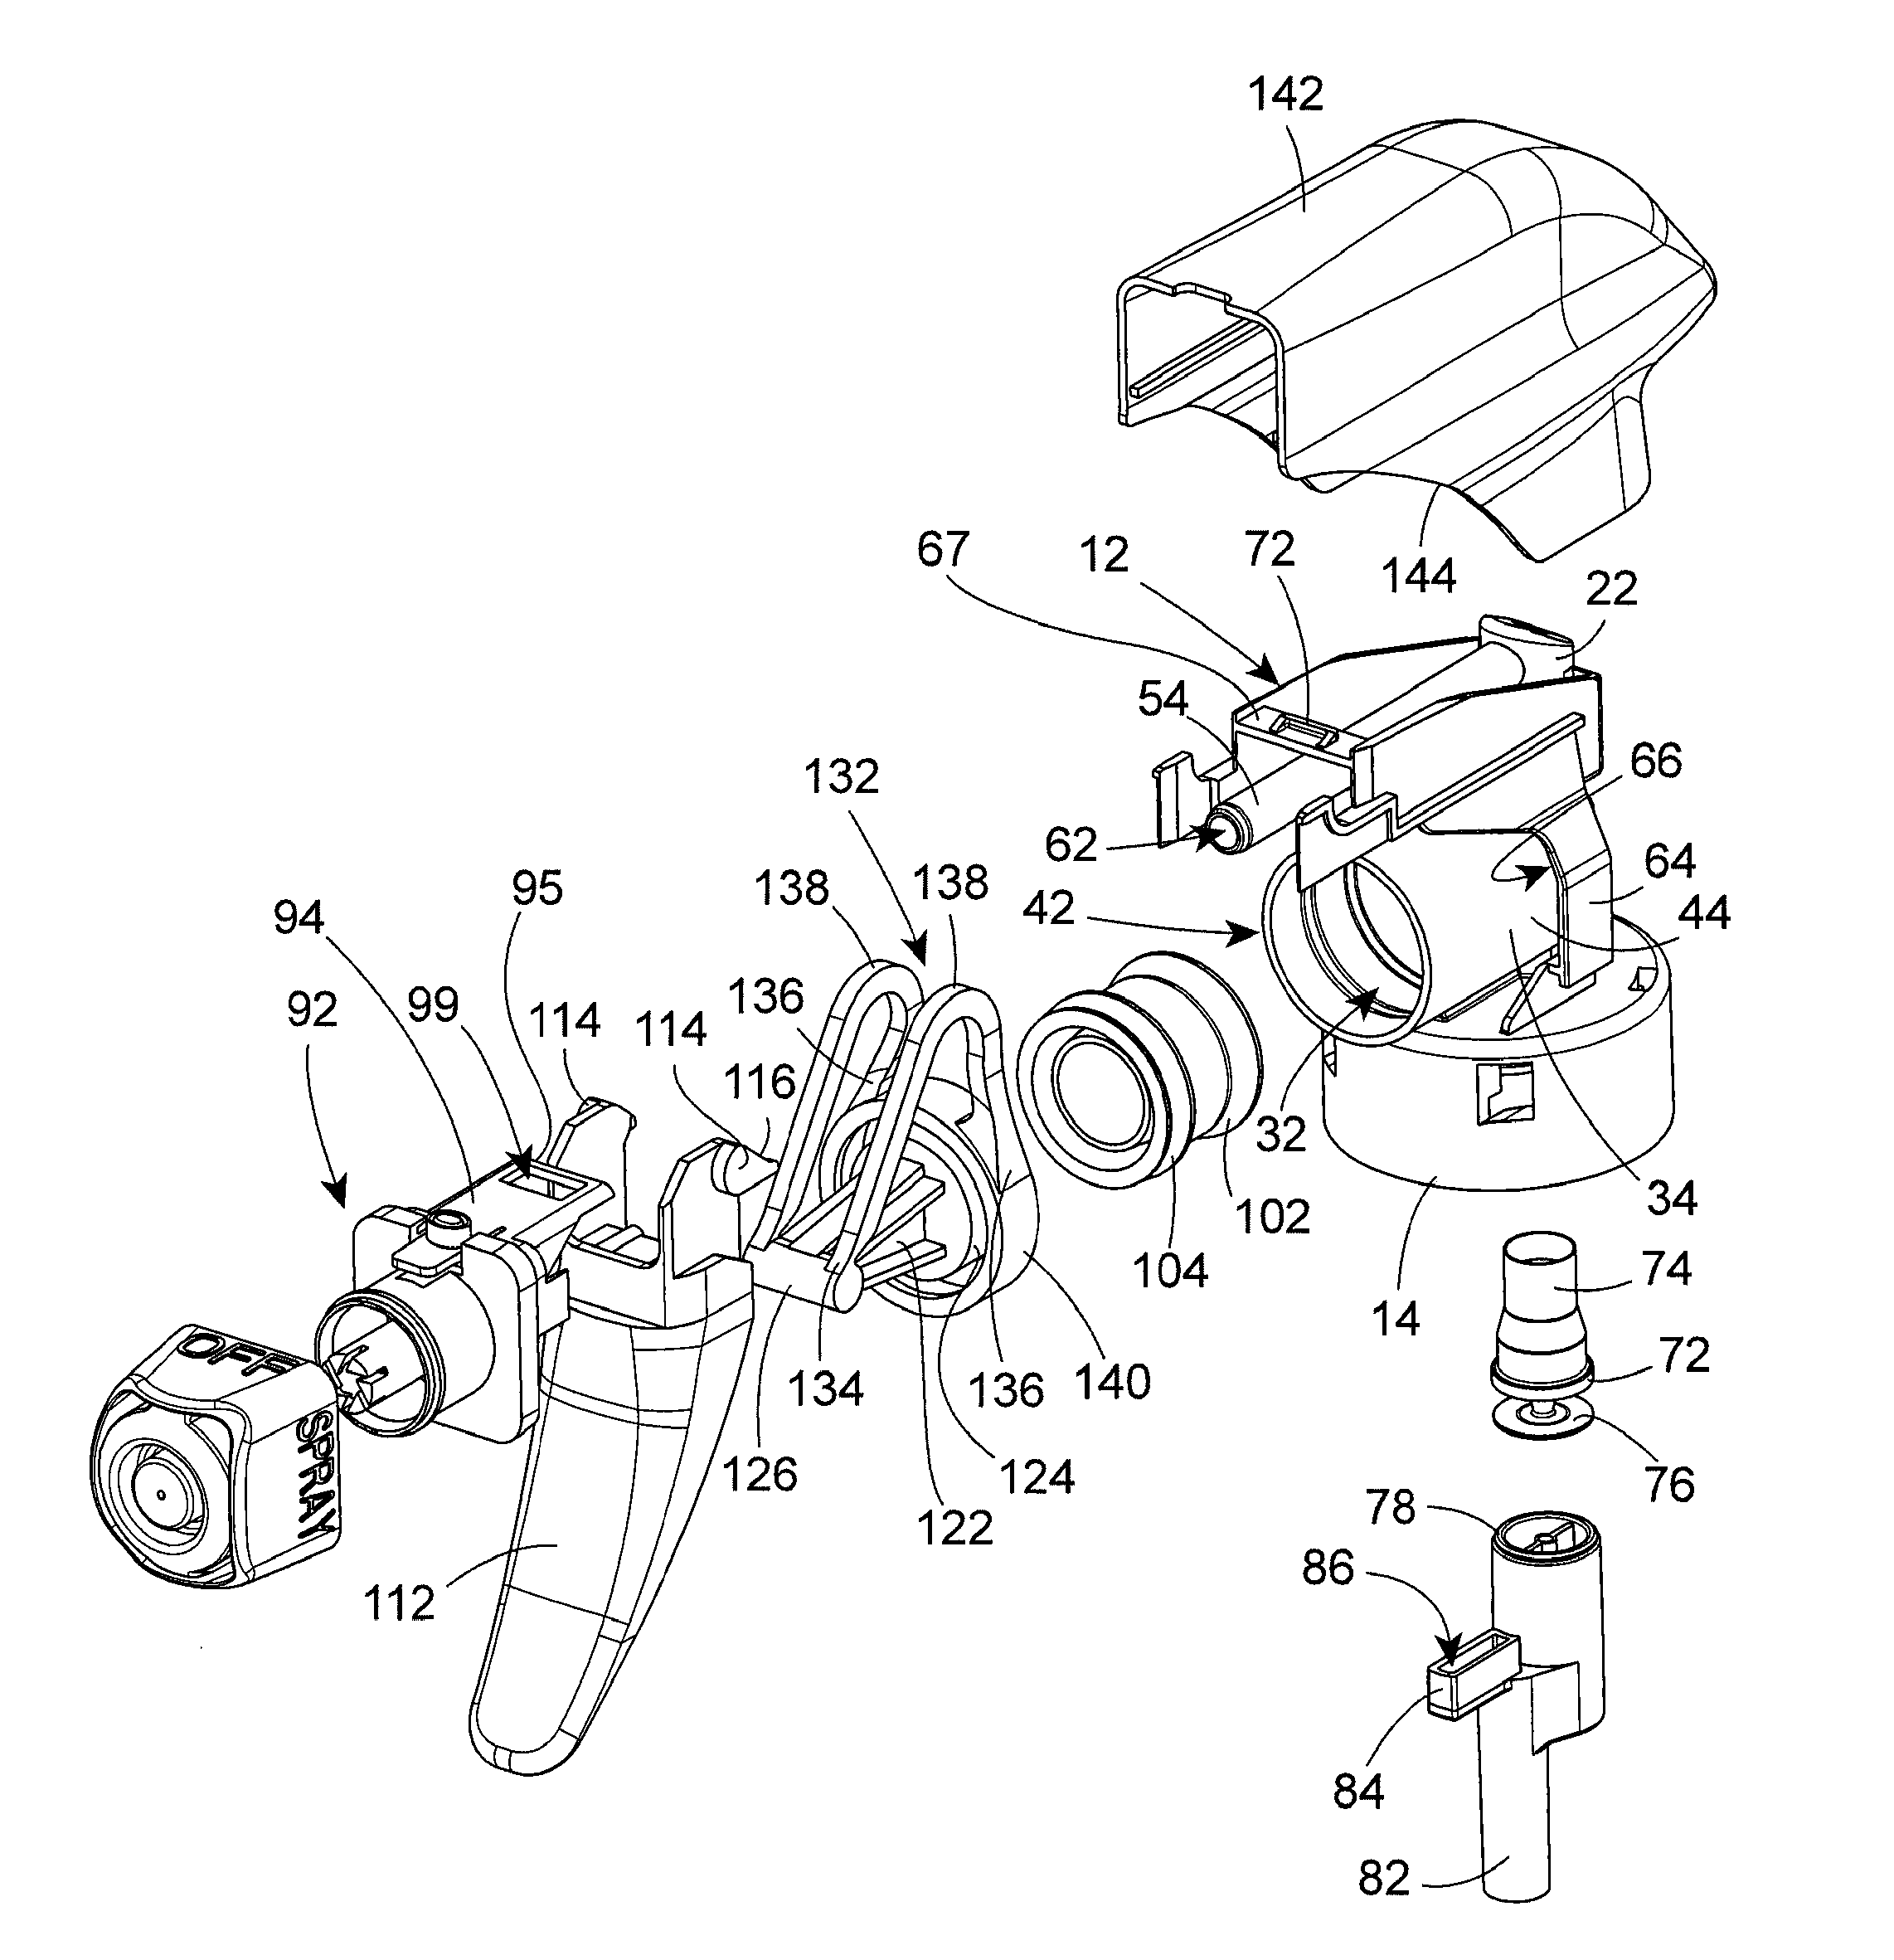 Trigger sprayer nozzle assembly and sprayer housing attachment lock